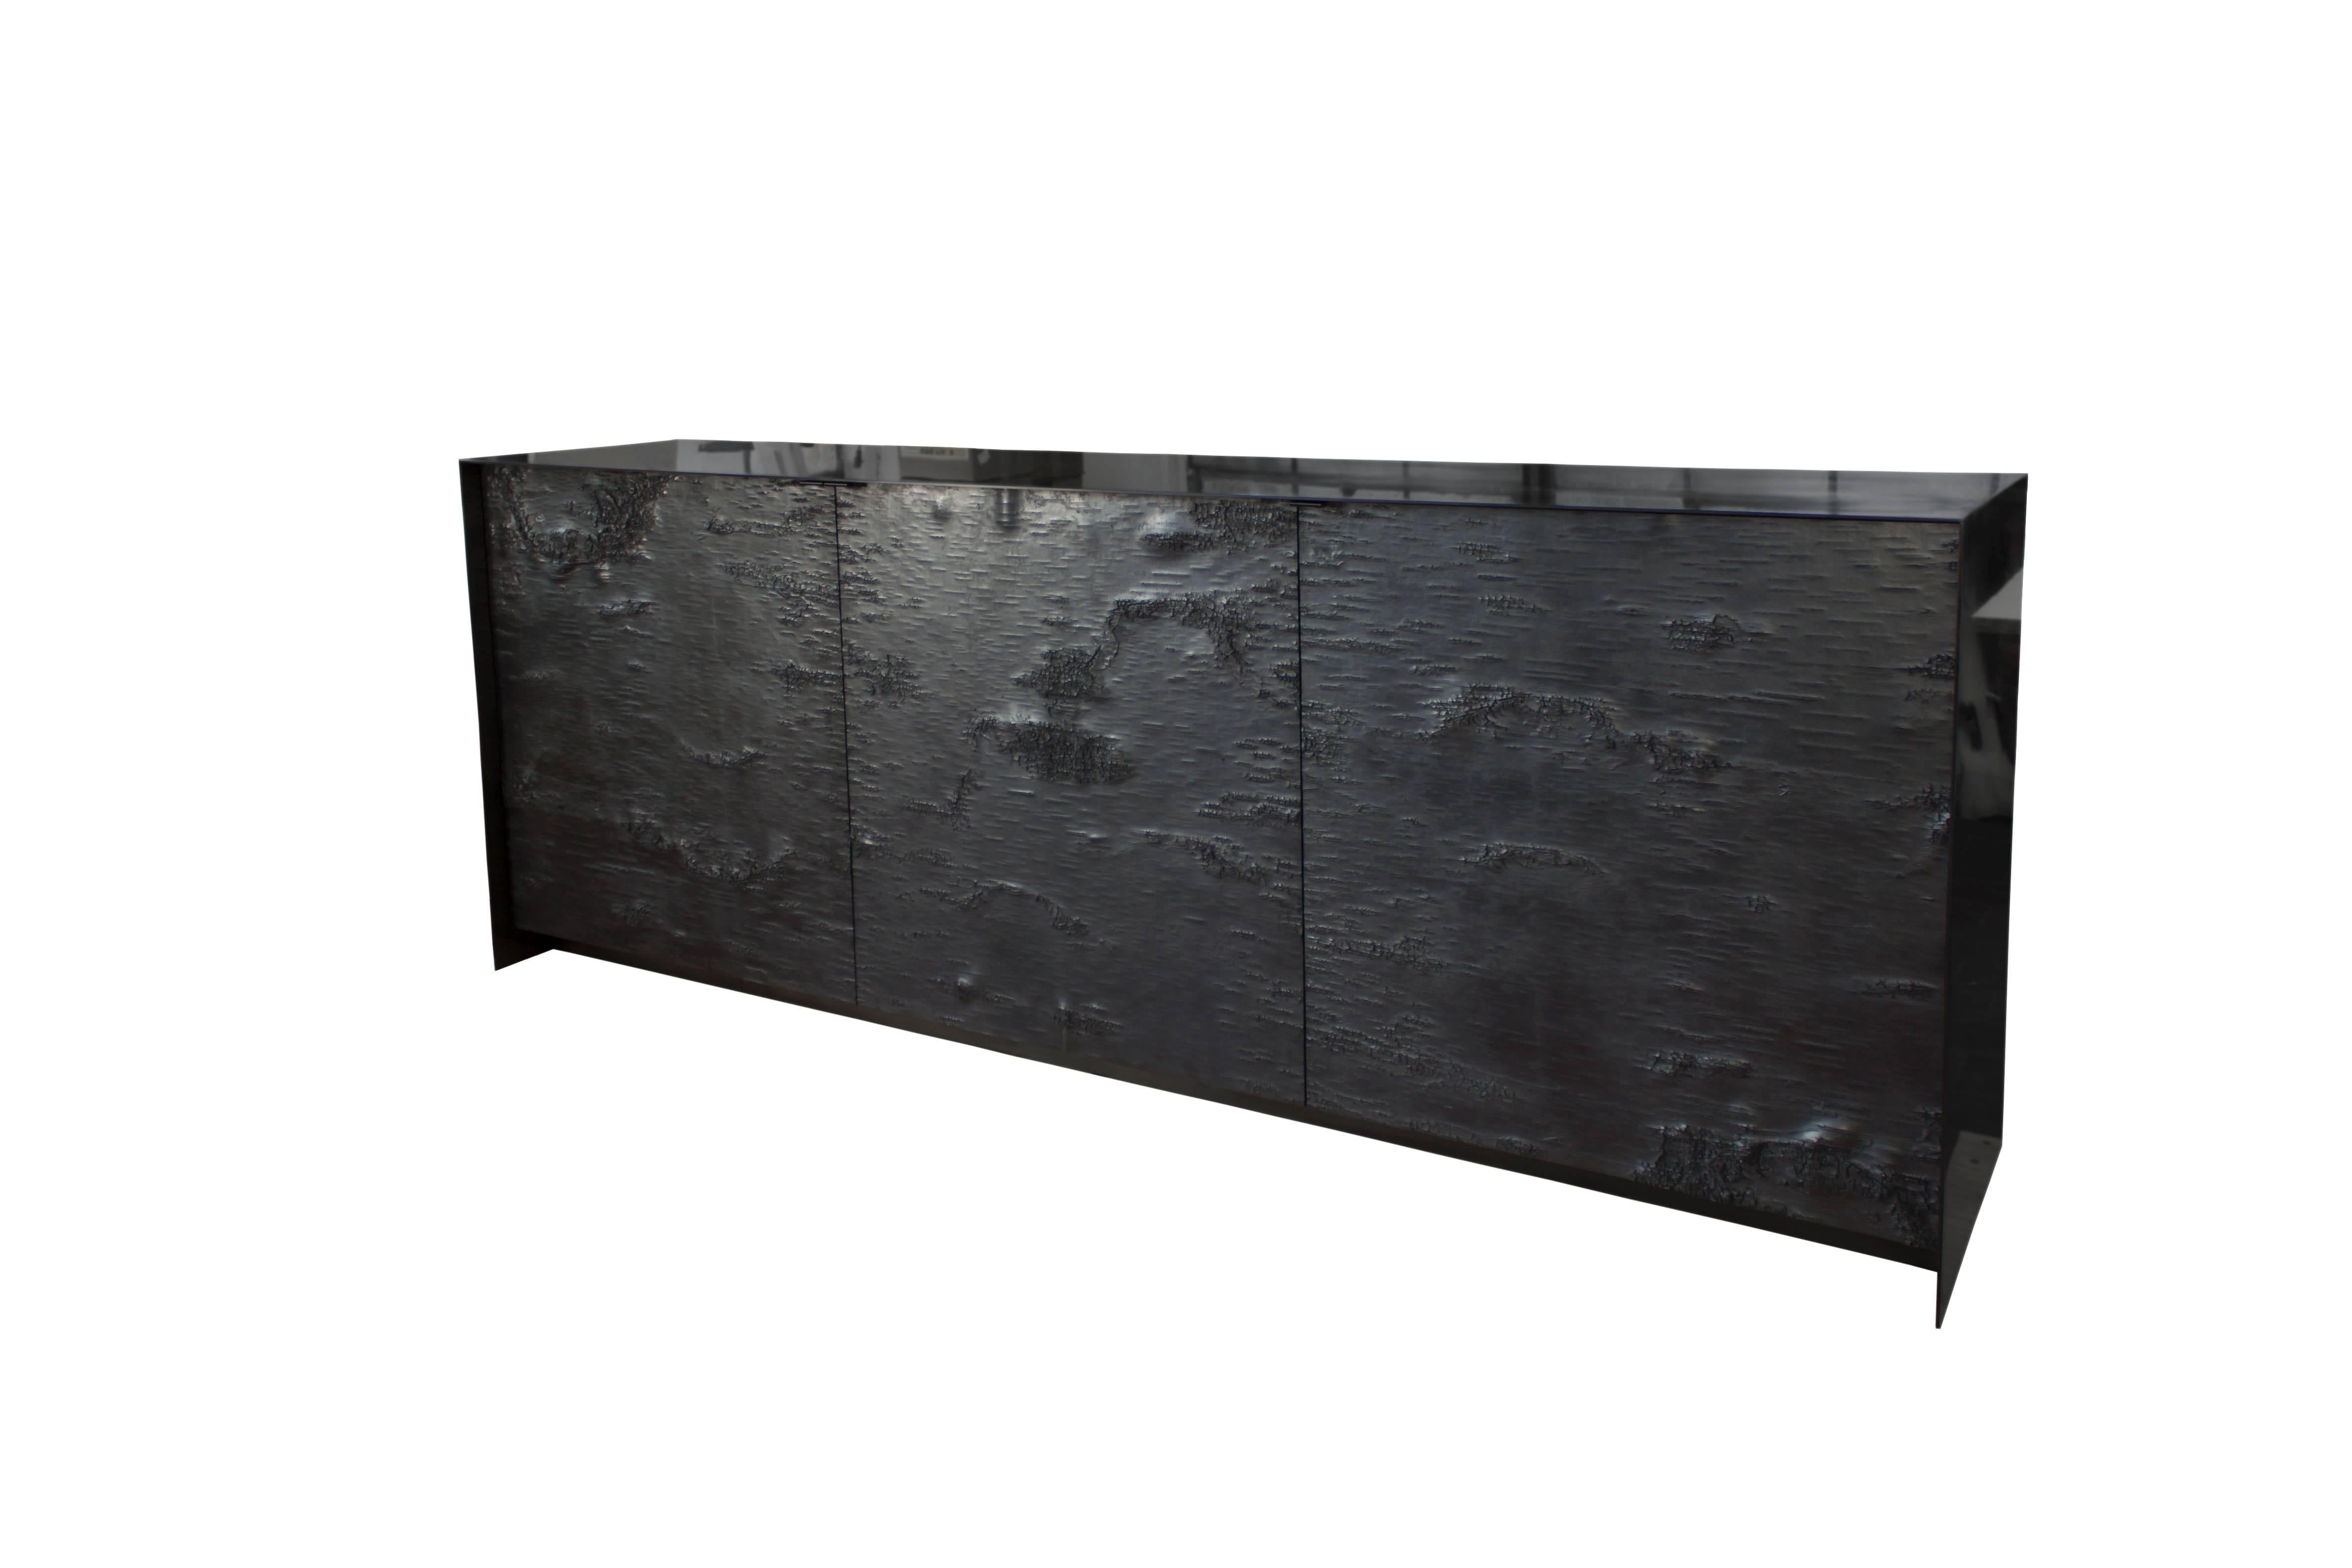 High detail textured birch bark doors executed in Ether Atelier’s exclusive Graphite cast finish deliver the perfect counterpoint to the sharp lines of the luster gunmetal black steel surround in unlacquered oil and wax finish. Ebonized Ash lines